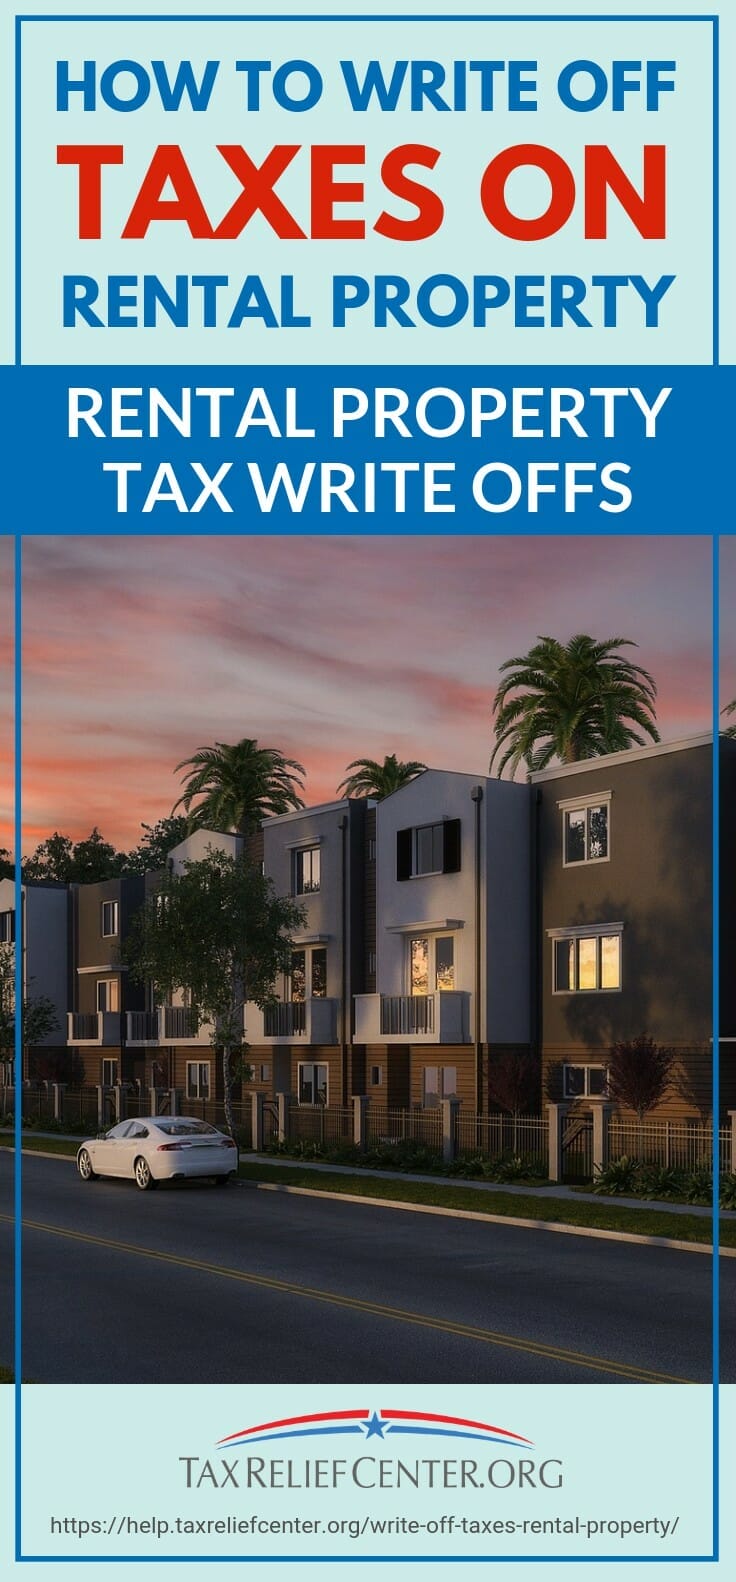 How To Write Off Taxes On Rental Property | Rental Property Tax Write Offs | https://help.taxreliefcenter.org/write-off-taxes-rental-property/